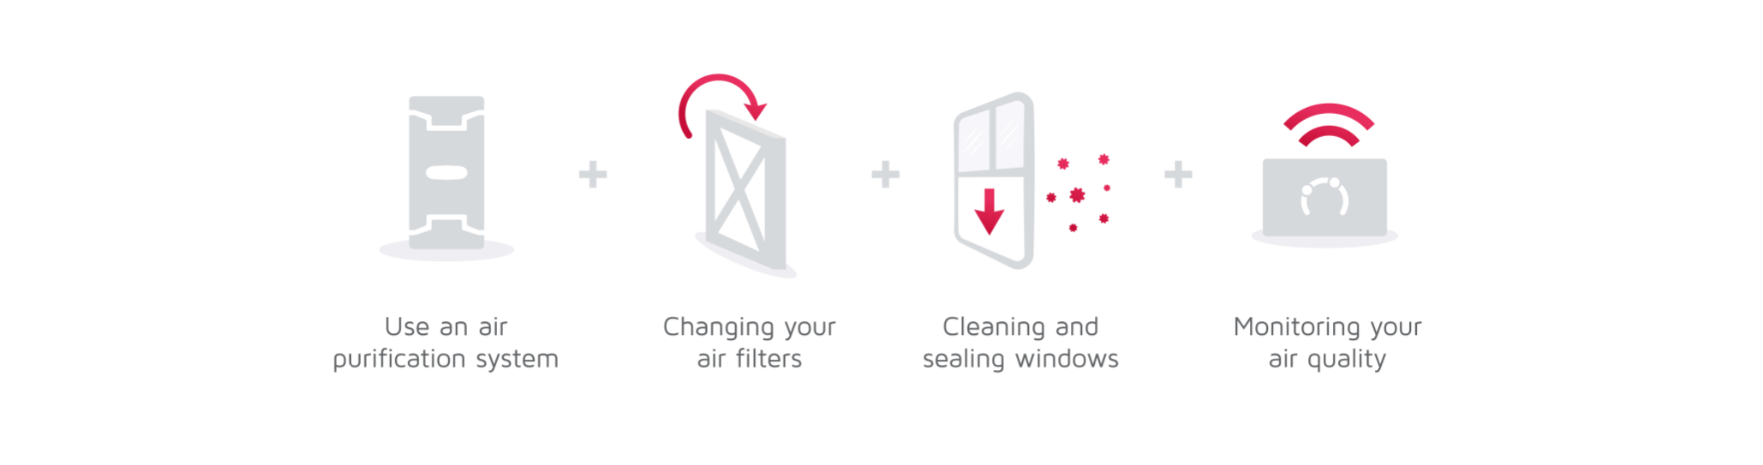 Tips for healthier air graphic